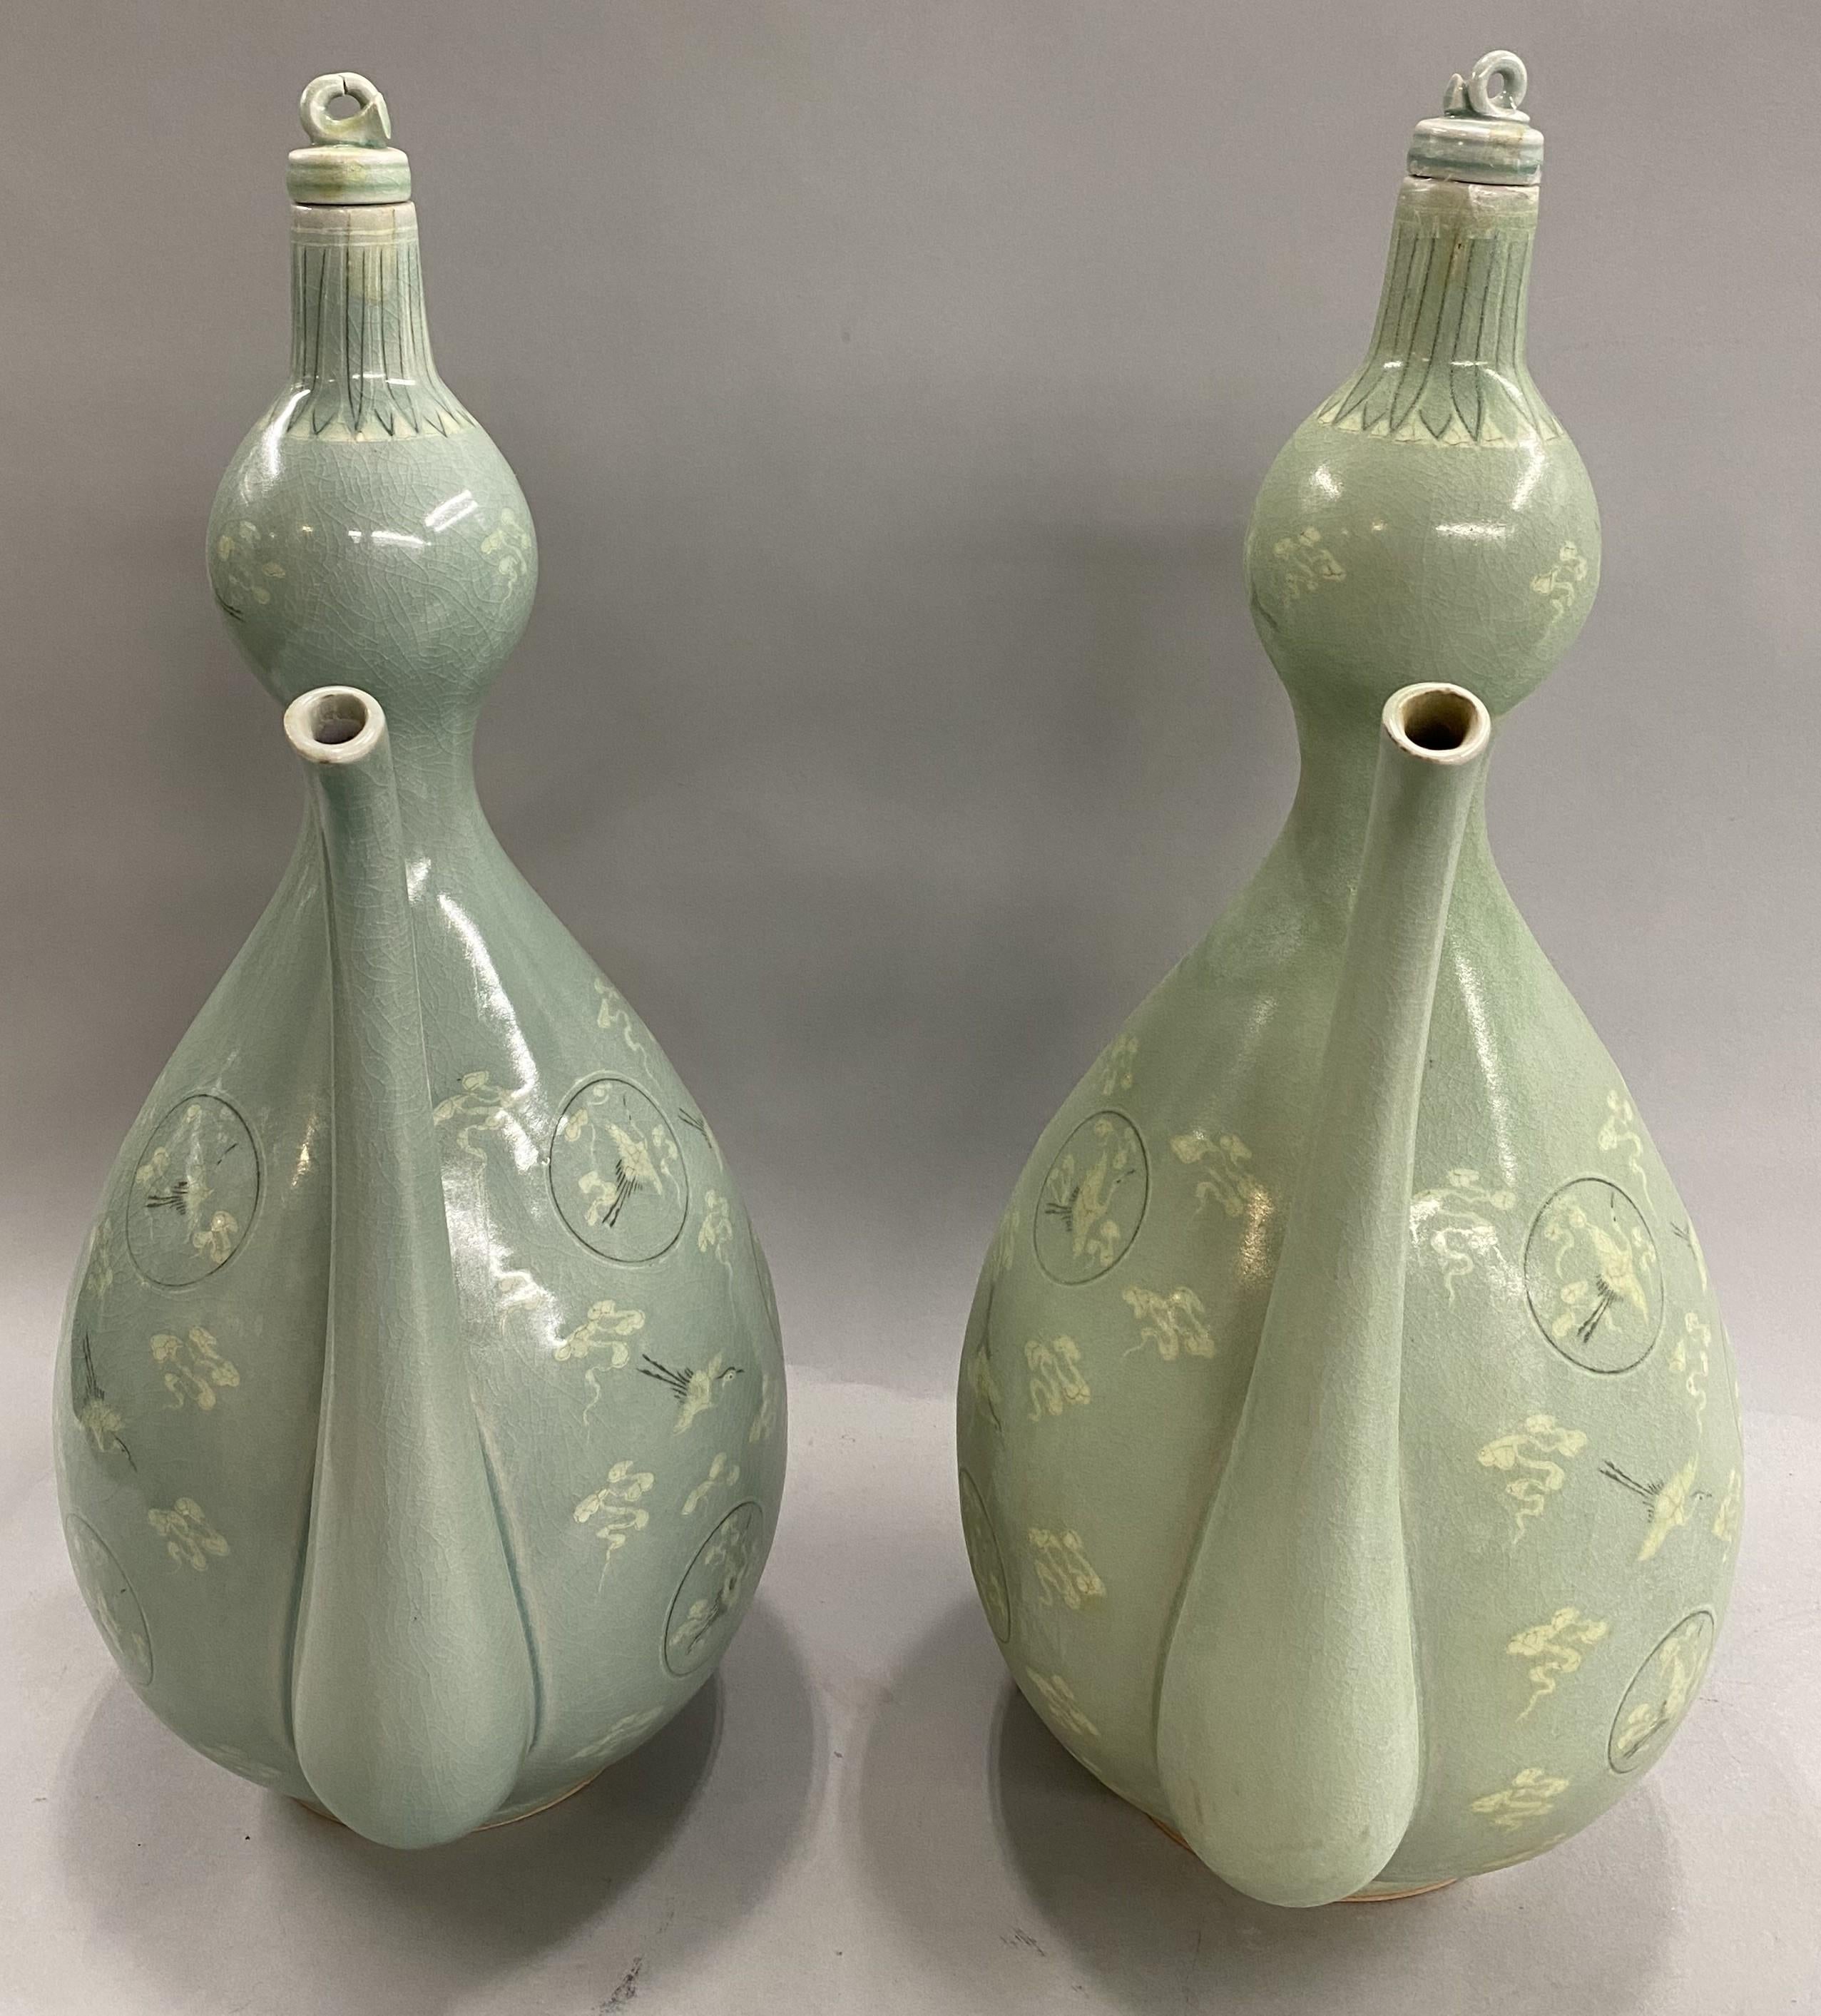 Fabulous Pair of Korean Stork Decorated Celadon Ewers In Good Condition For Sale In Milford, NH